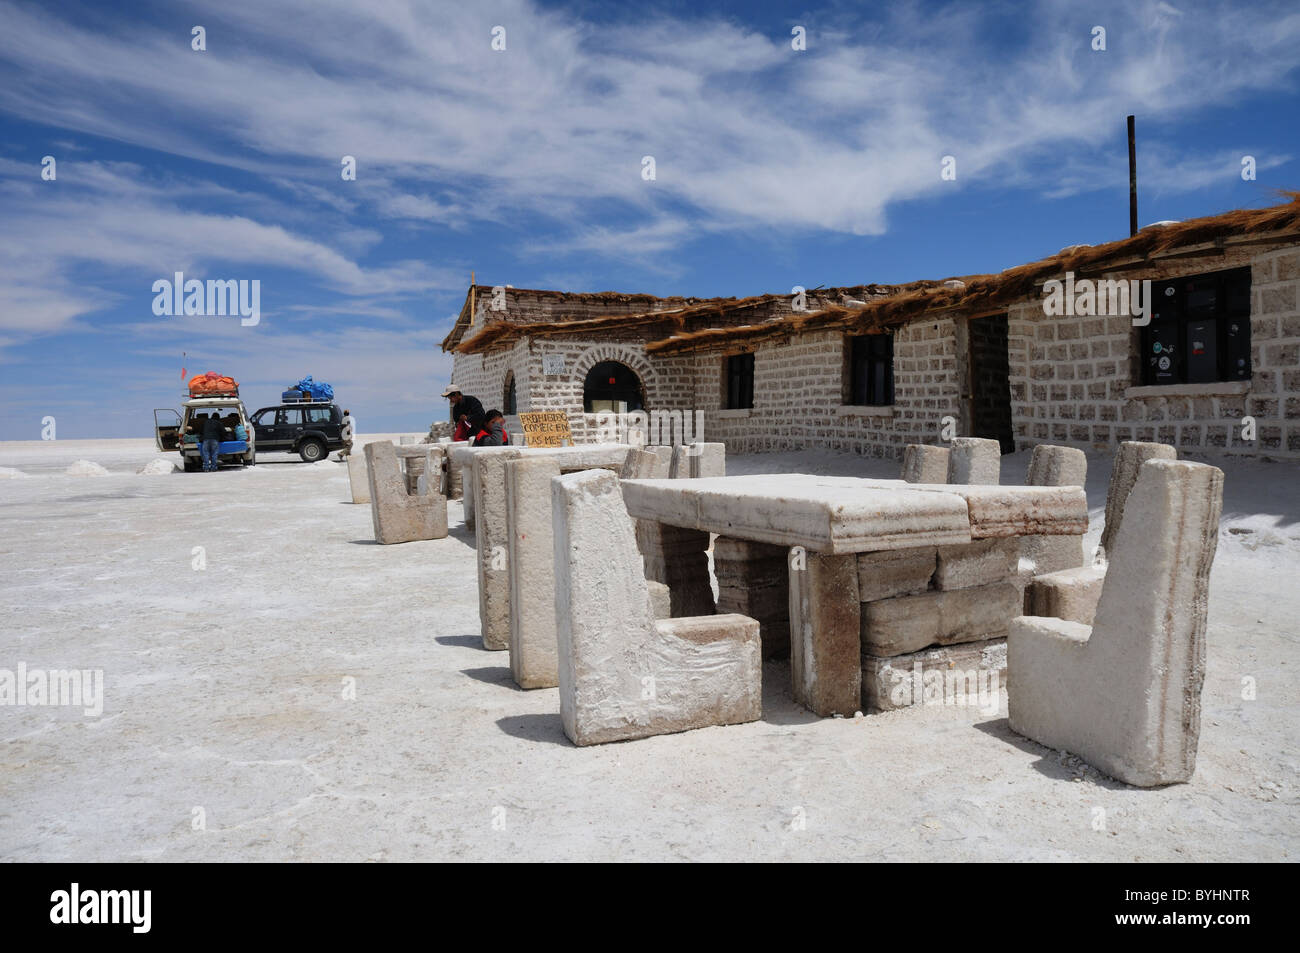 Tables and chairs made from salt outside a salt hotel on the Salar de uyuni in Bolivia Stock Photo